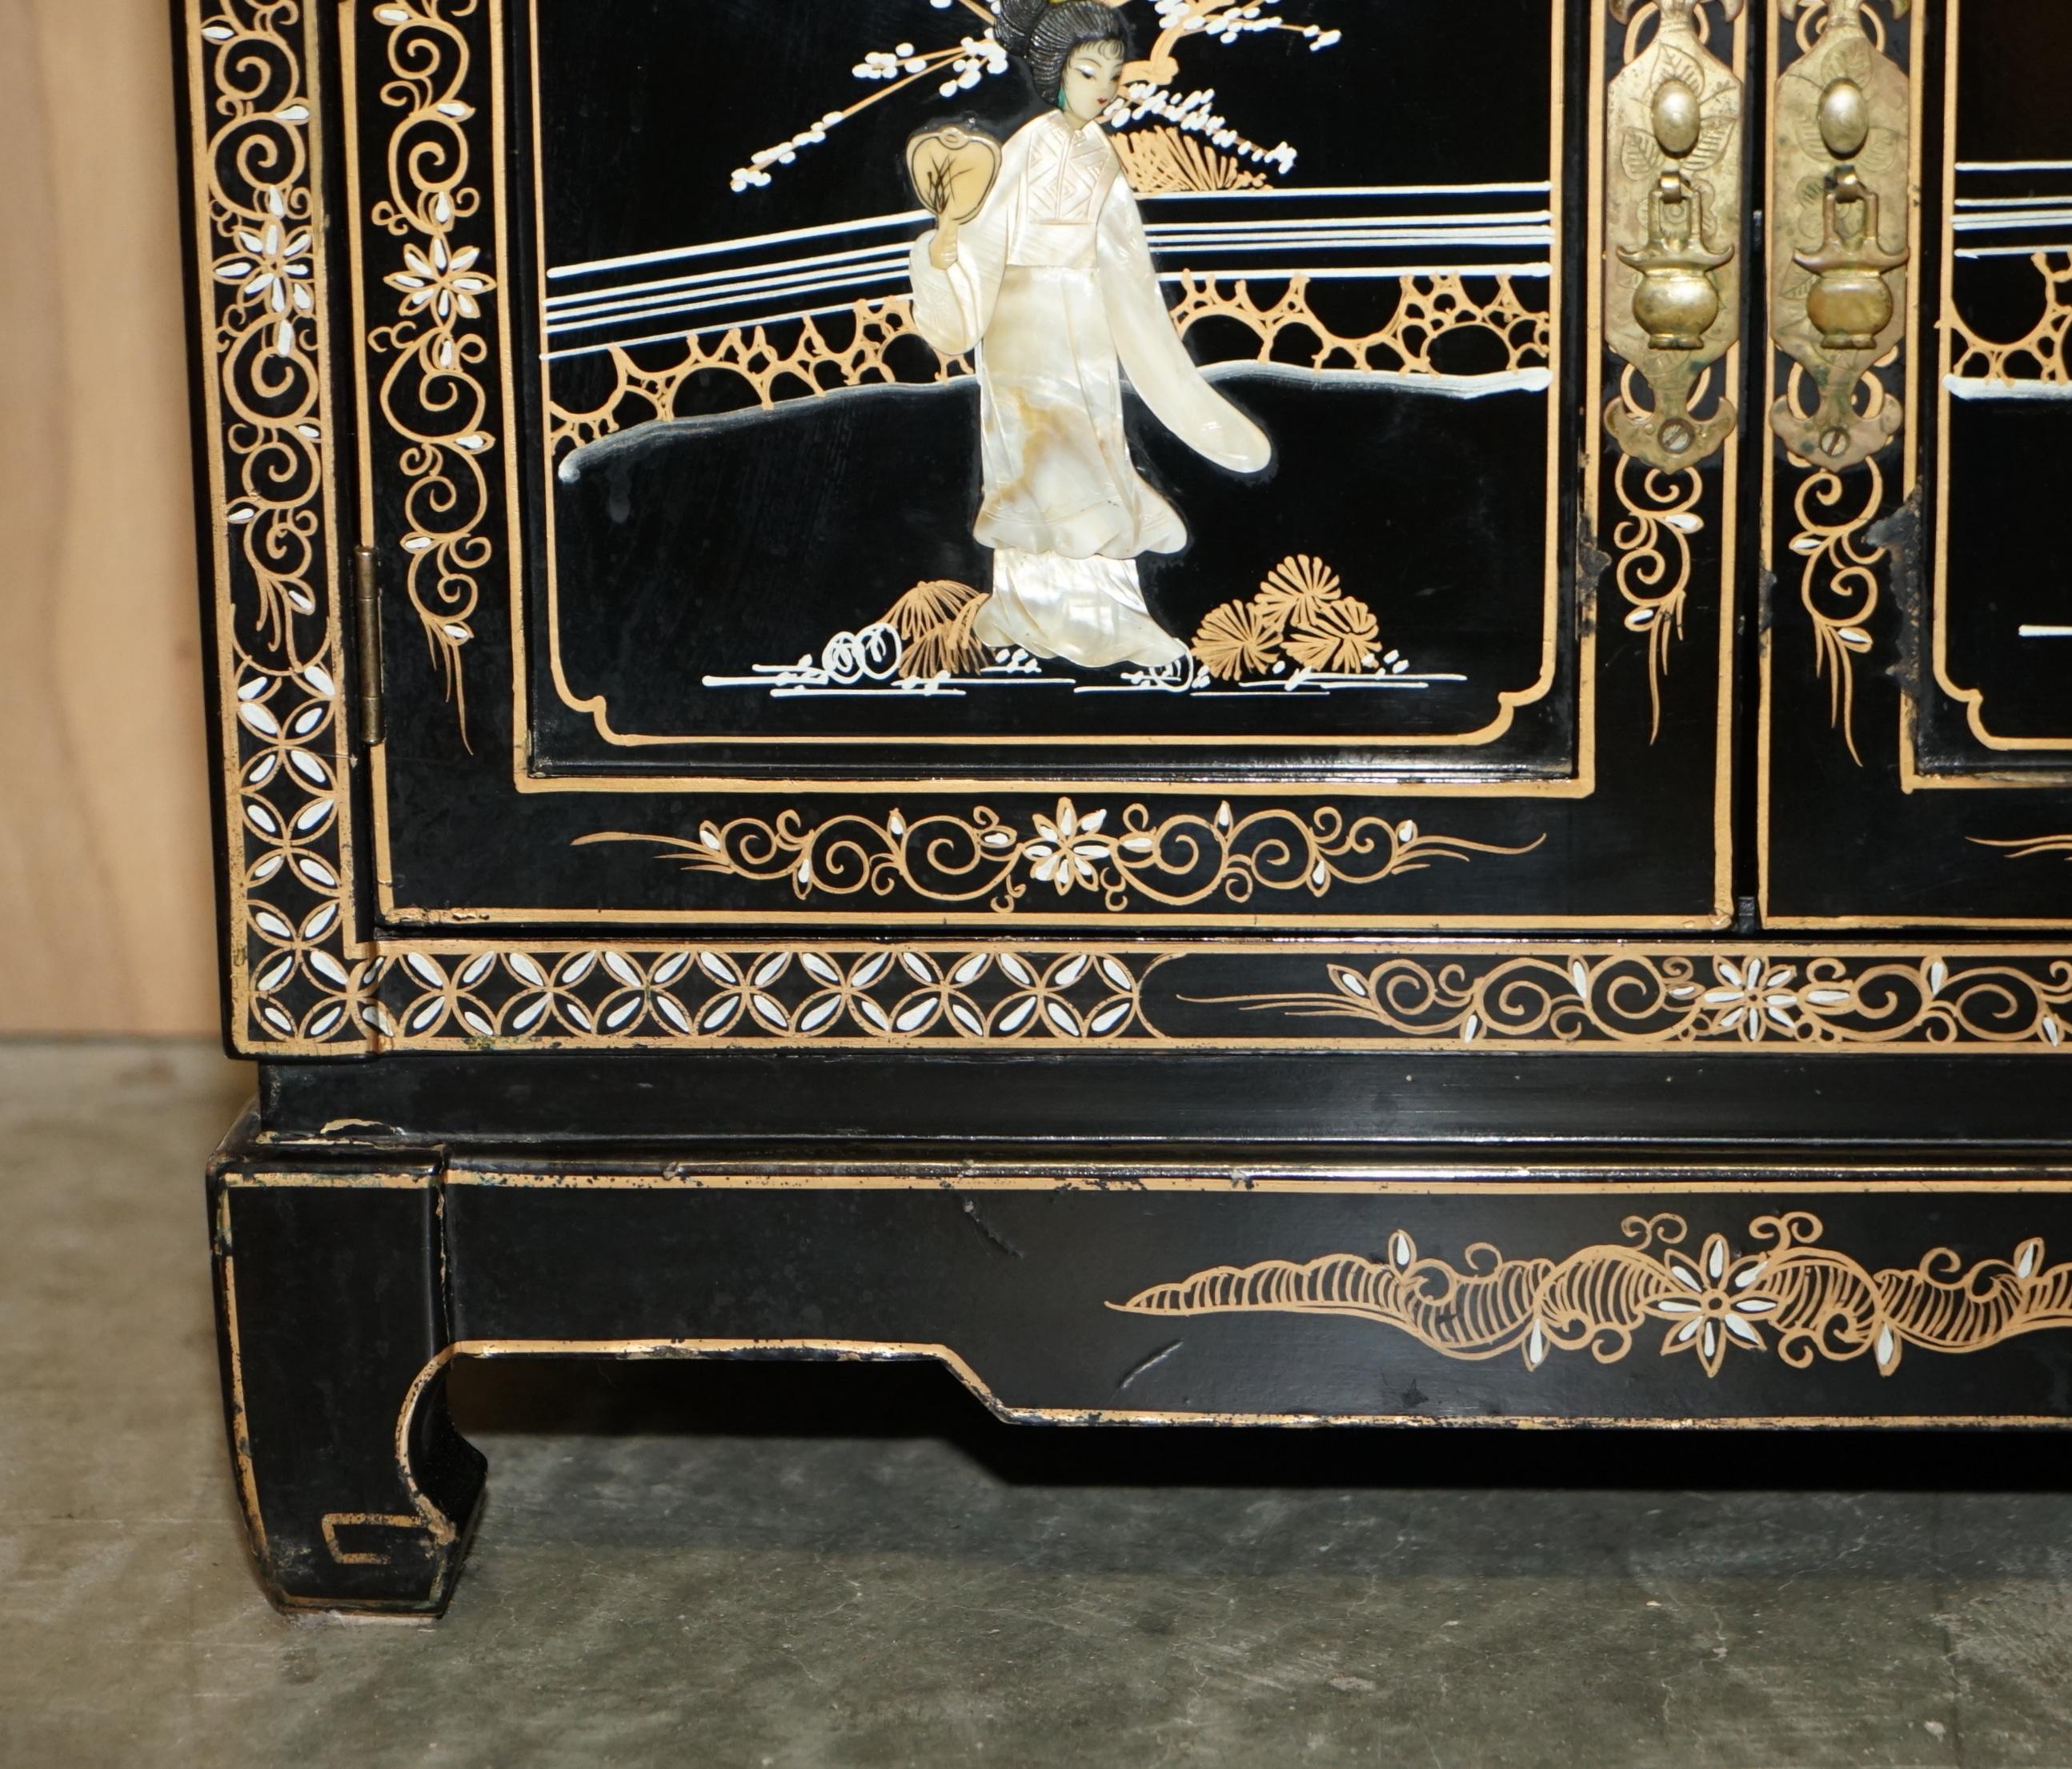 20ième siècle Stunning CHINOISERIE GEISHA GIRLS LACQUER SiDE CABINET SOAPSTONE en vente